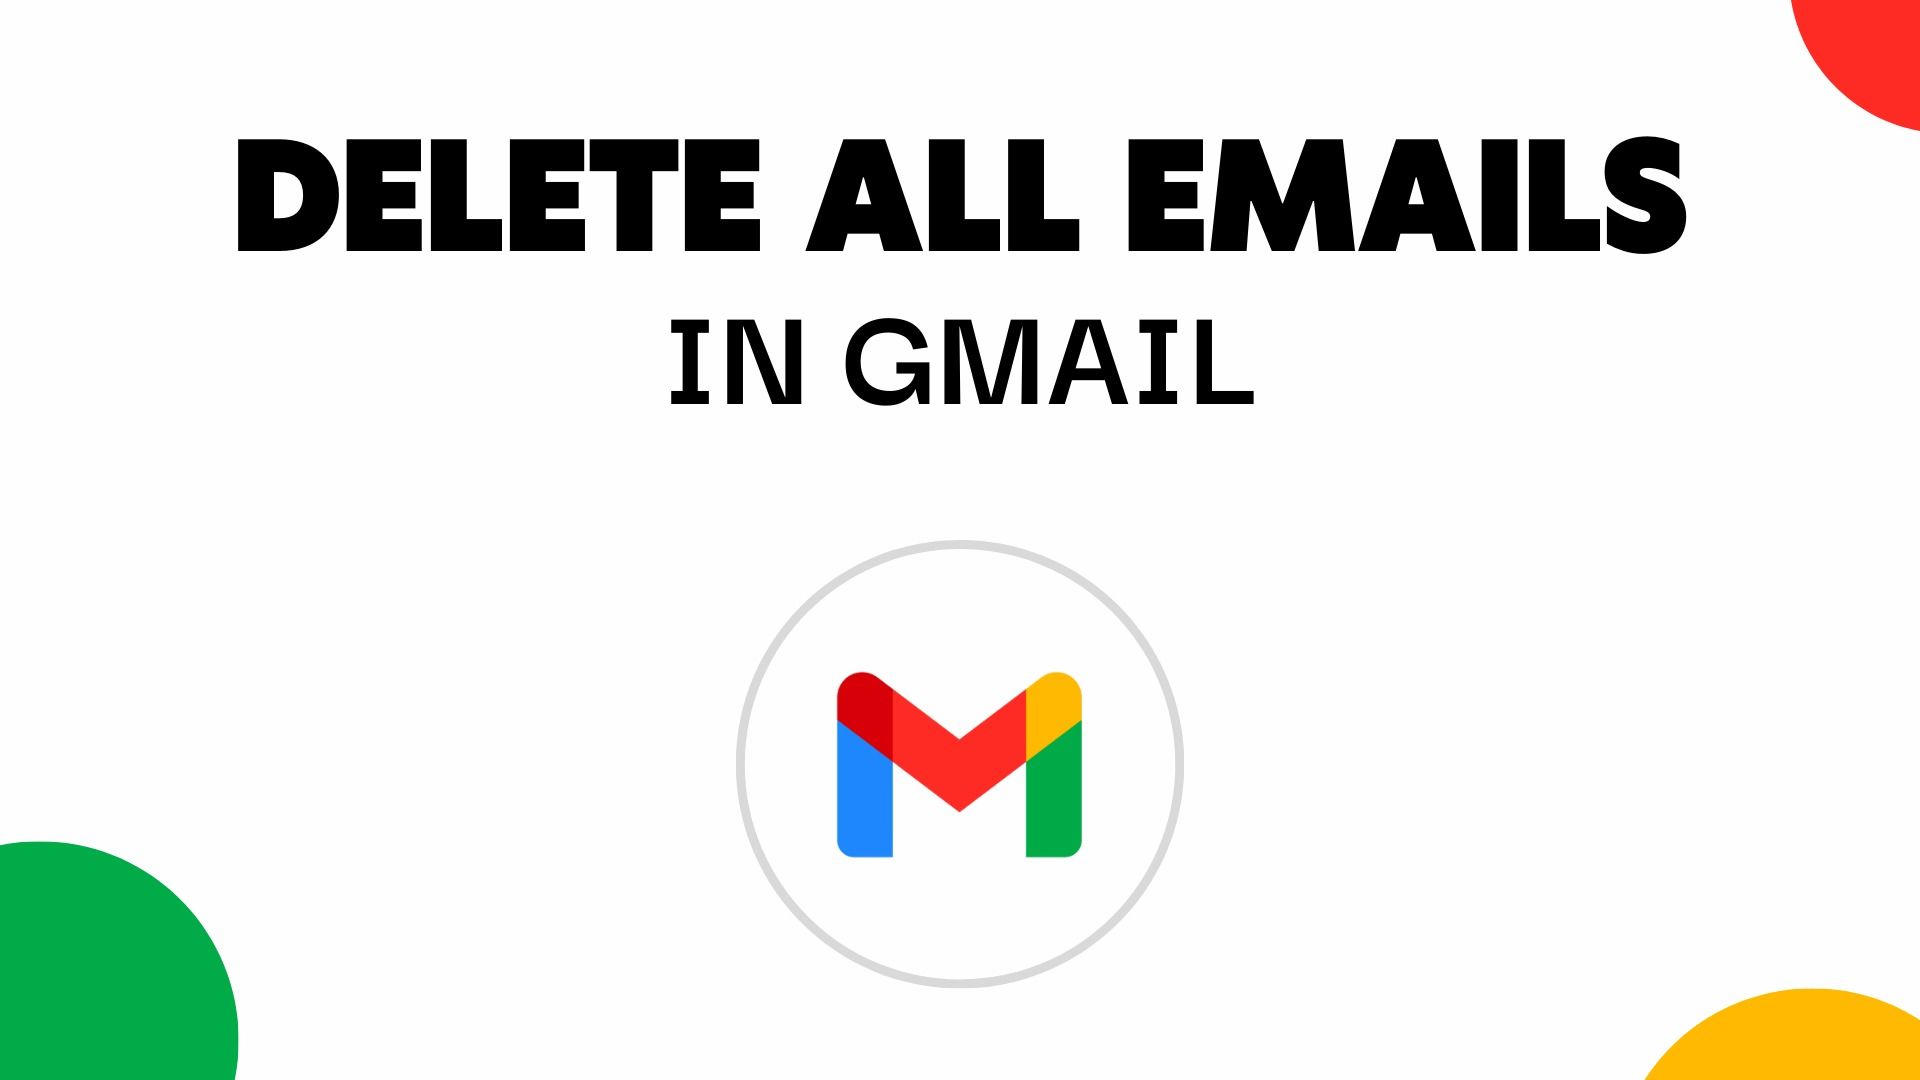 can you delete mass emails on gmail